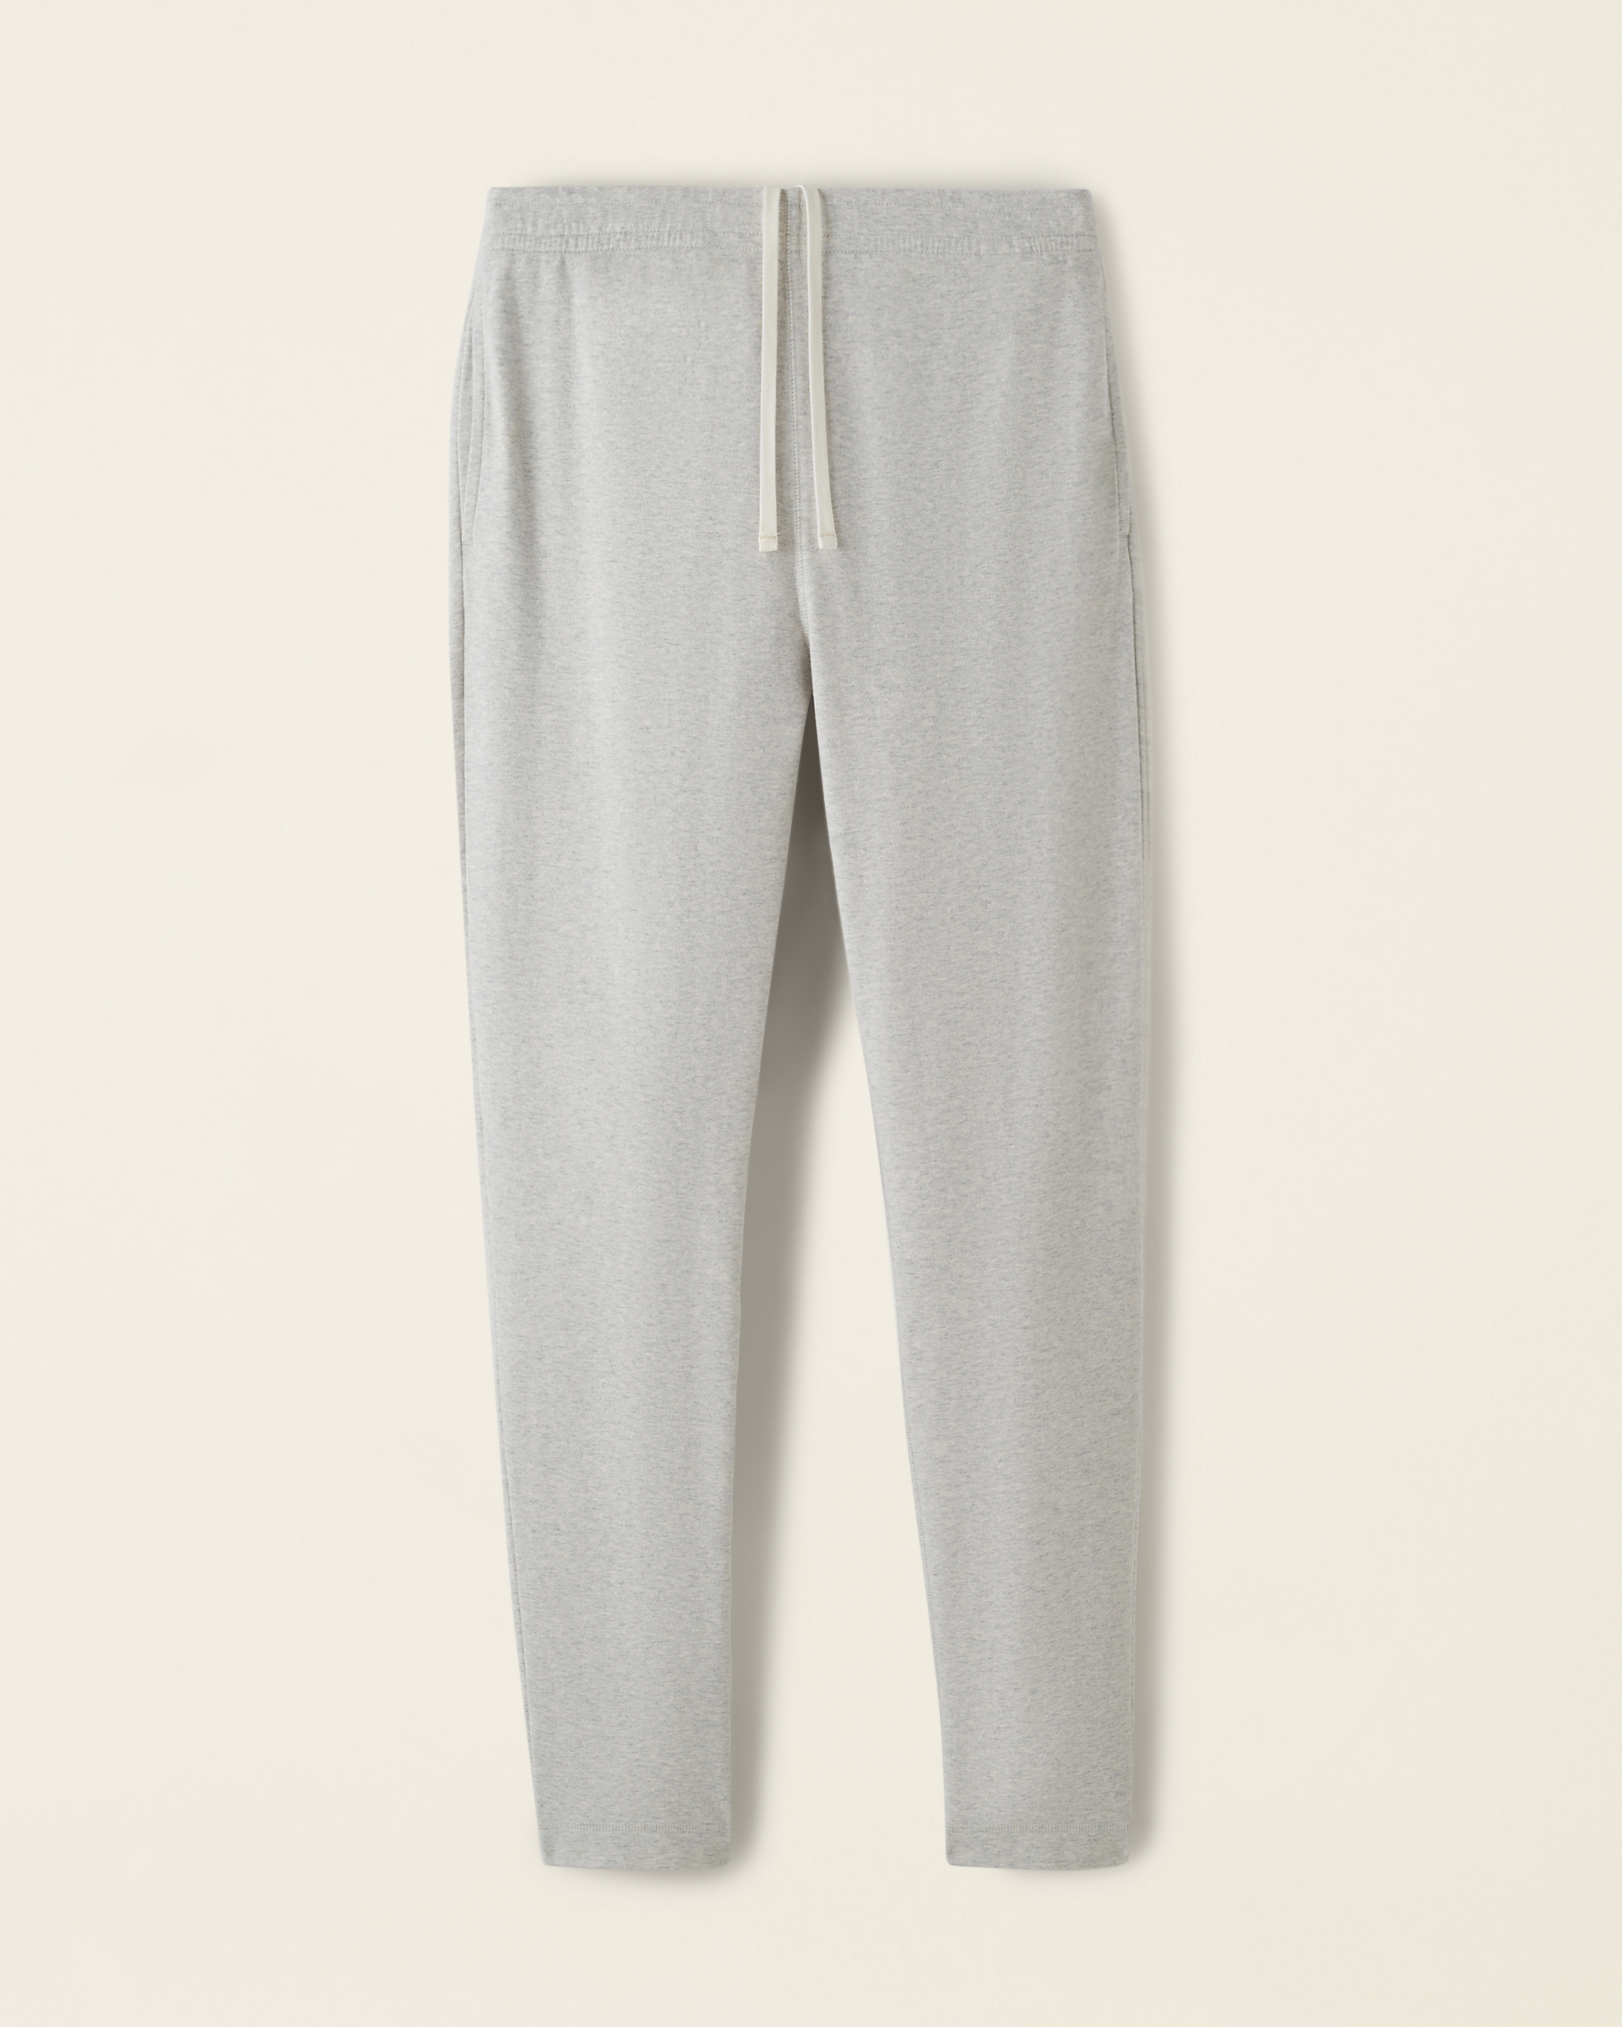 Roots Pender Pant in White Mix